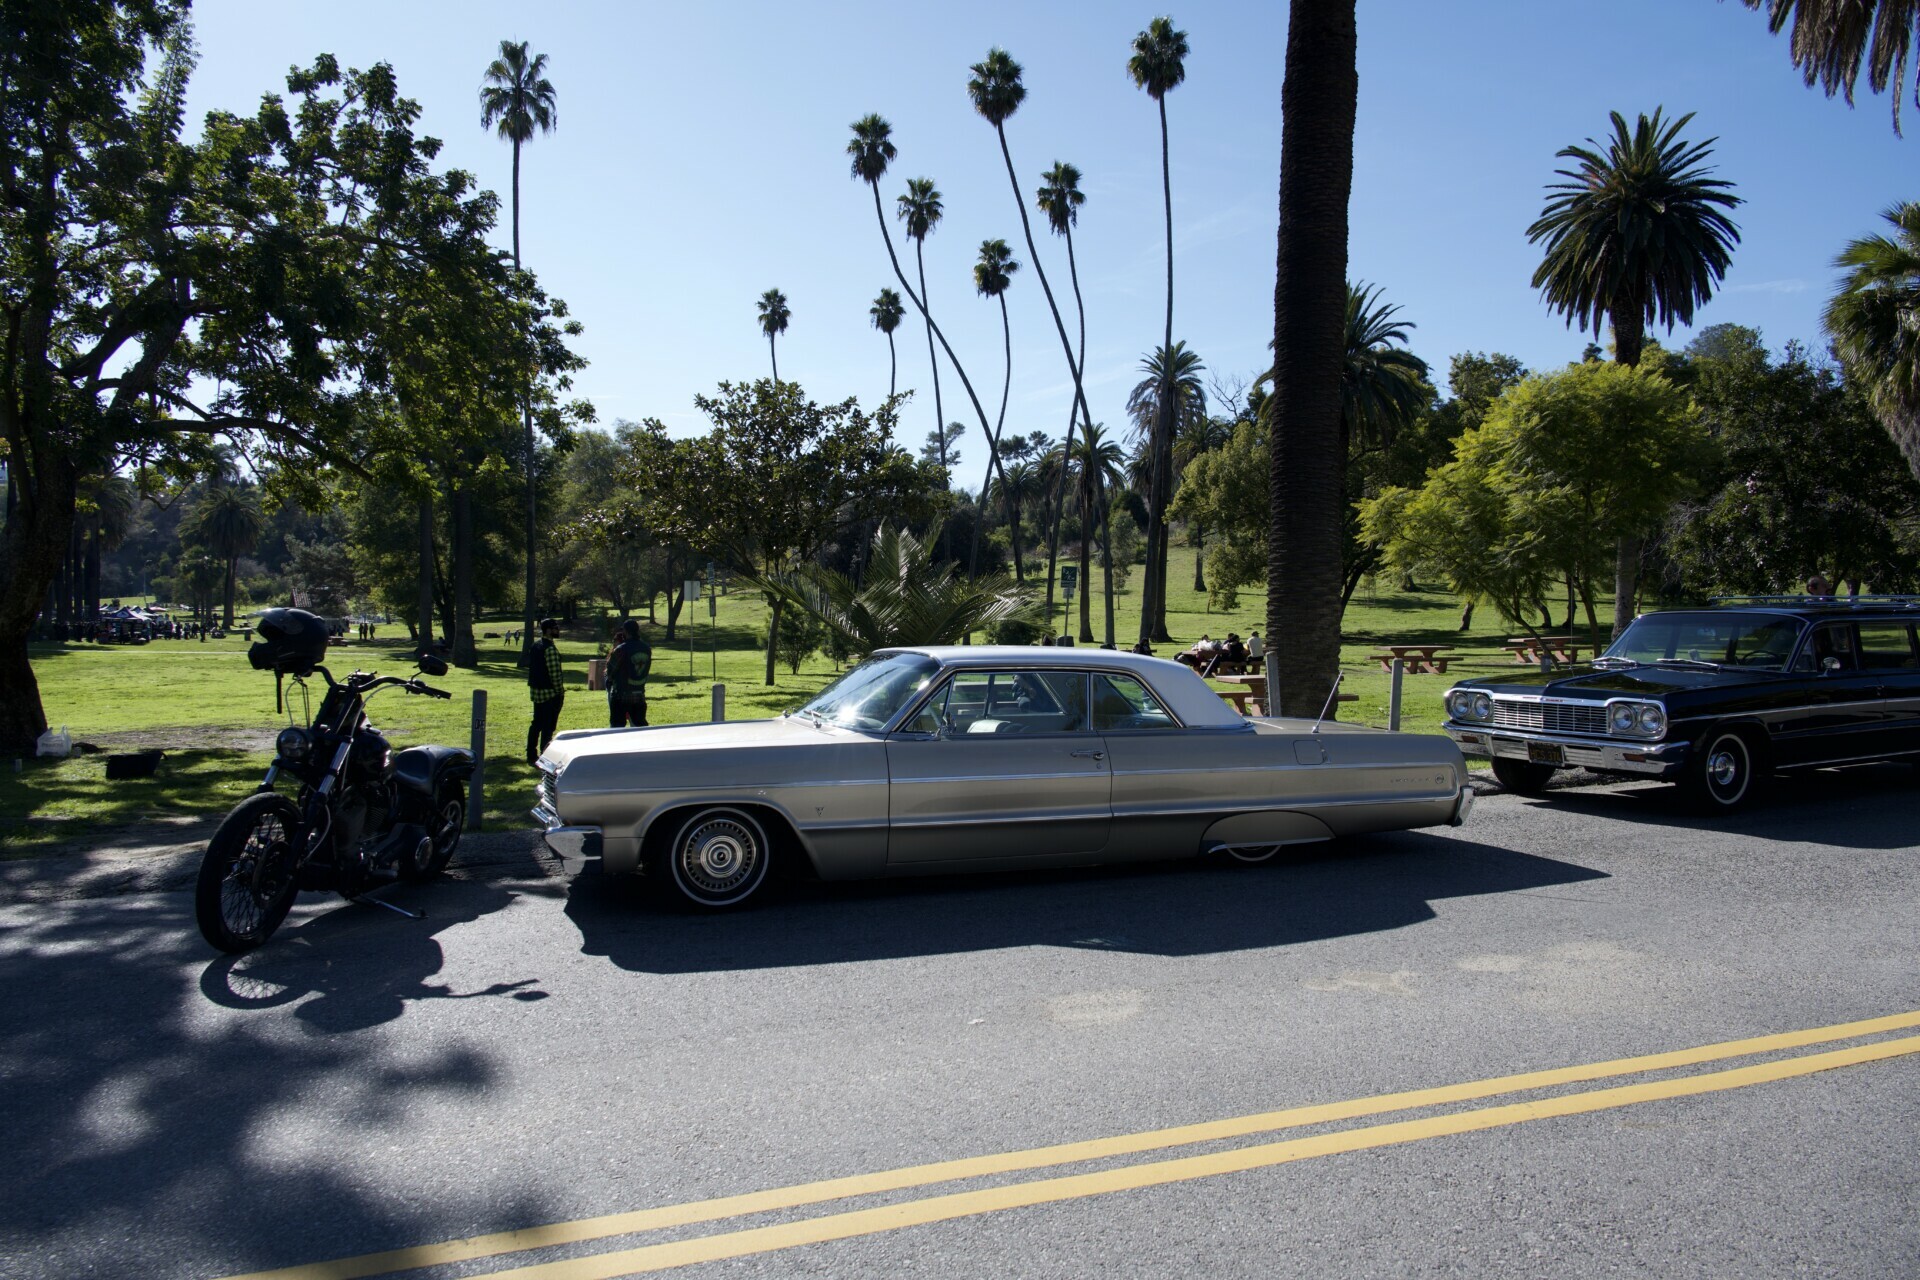 Vintage cars parked under towering palm trees in Elysian Park, Los Angeles